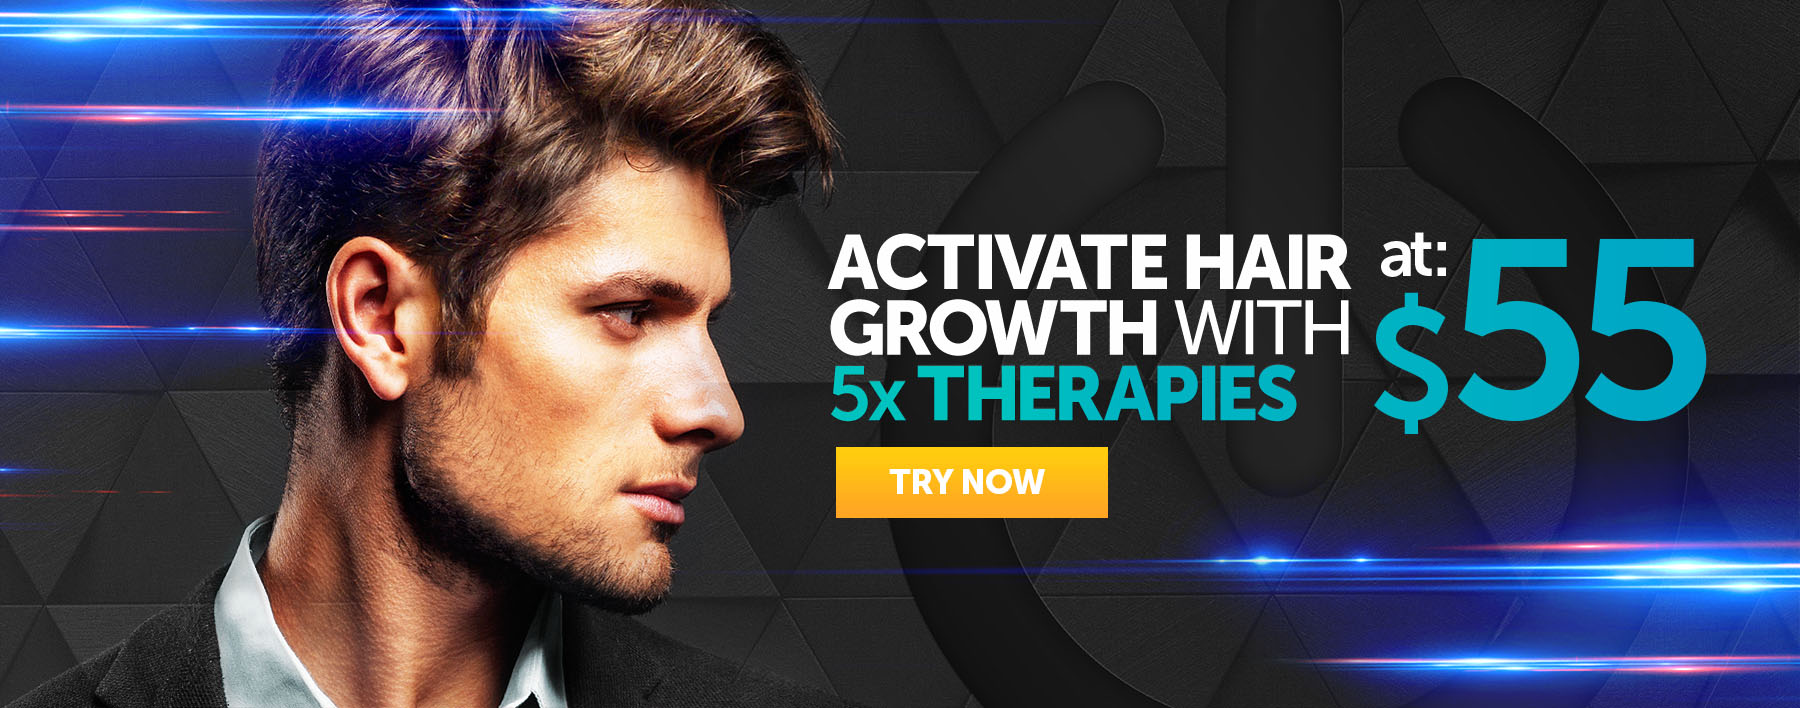 Activate Hair Growth with 5 Therapies